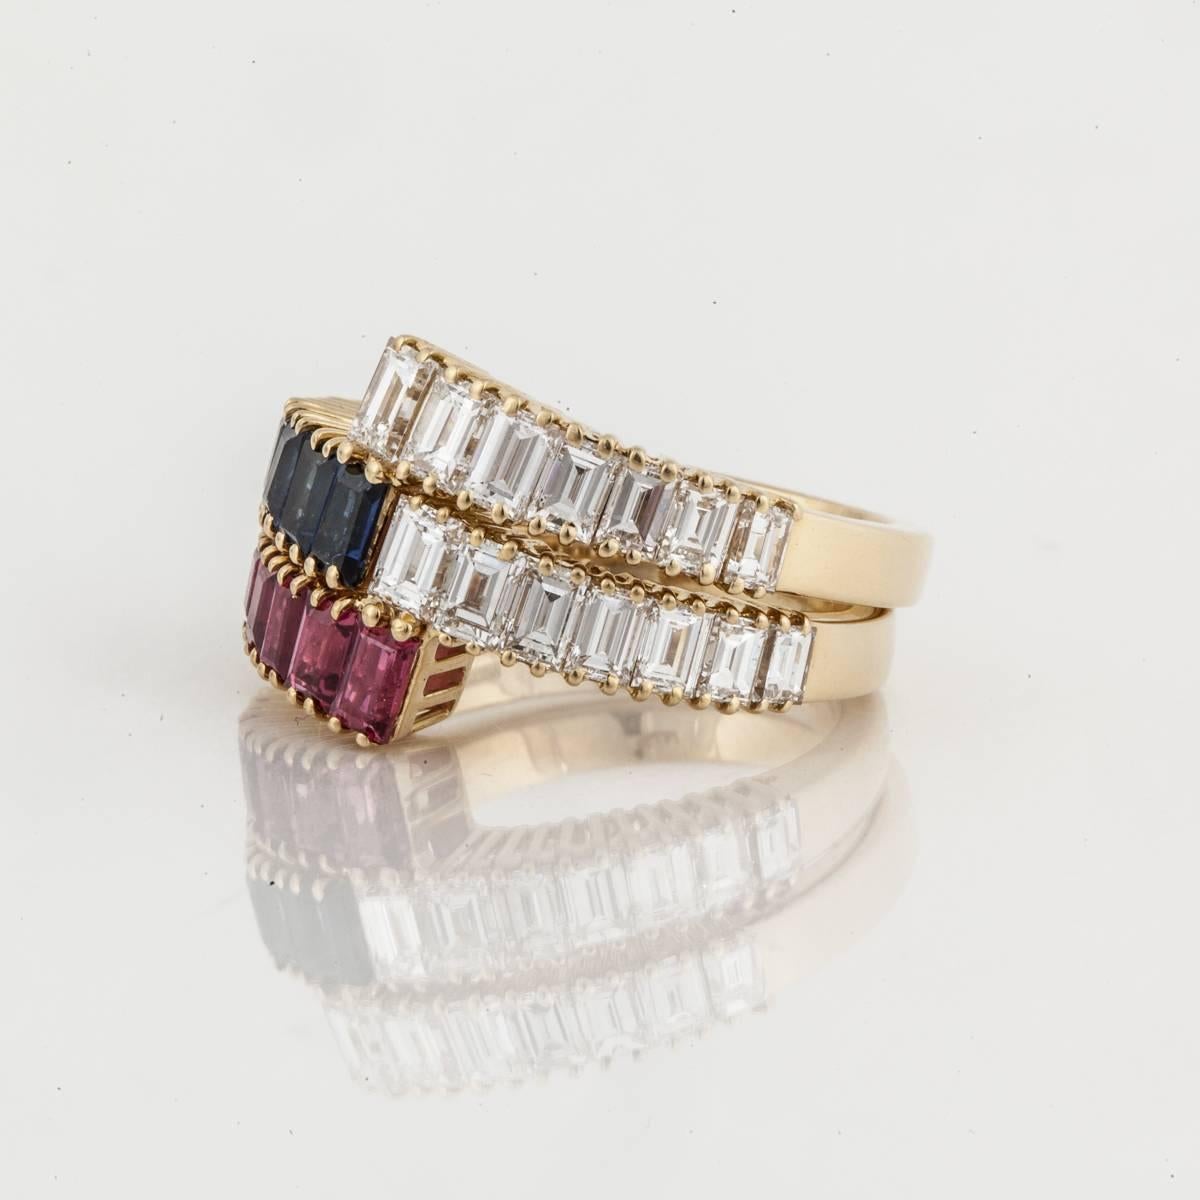 Two crossover style bands composed of 18K yellow gold.  One band has baguette rubies and baguette diamonds.  The other band has baguette sapphires and baguette diamonds.  They can be fitted to stack/nest together or can be worn individually.  Each